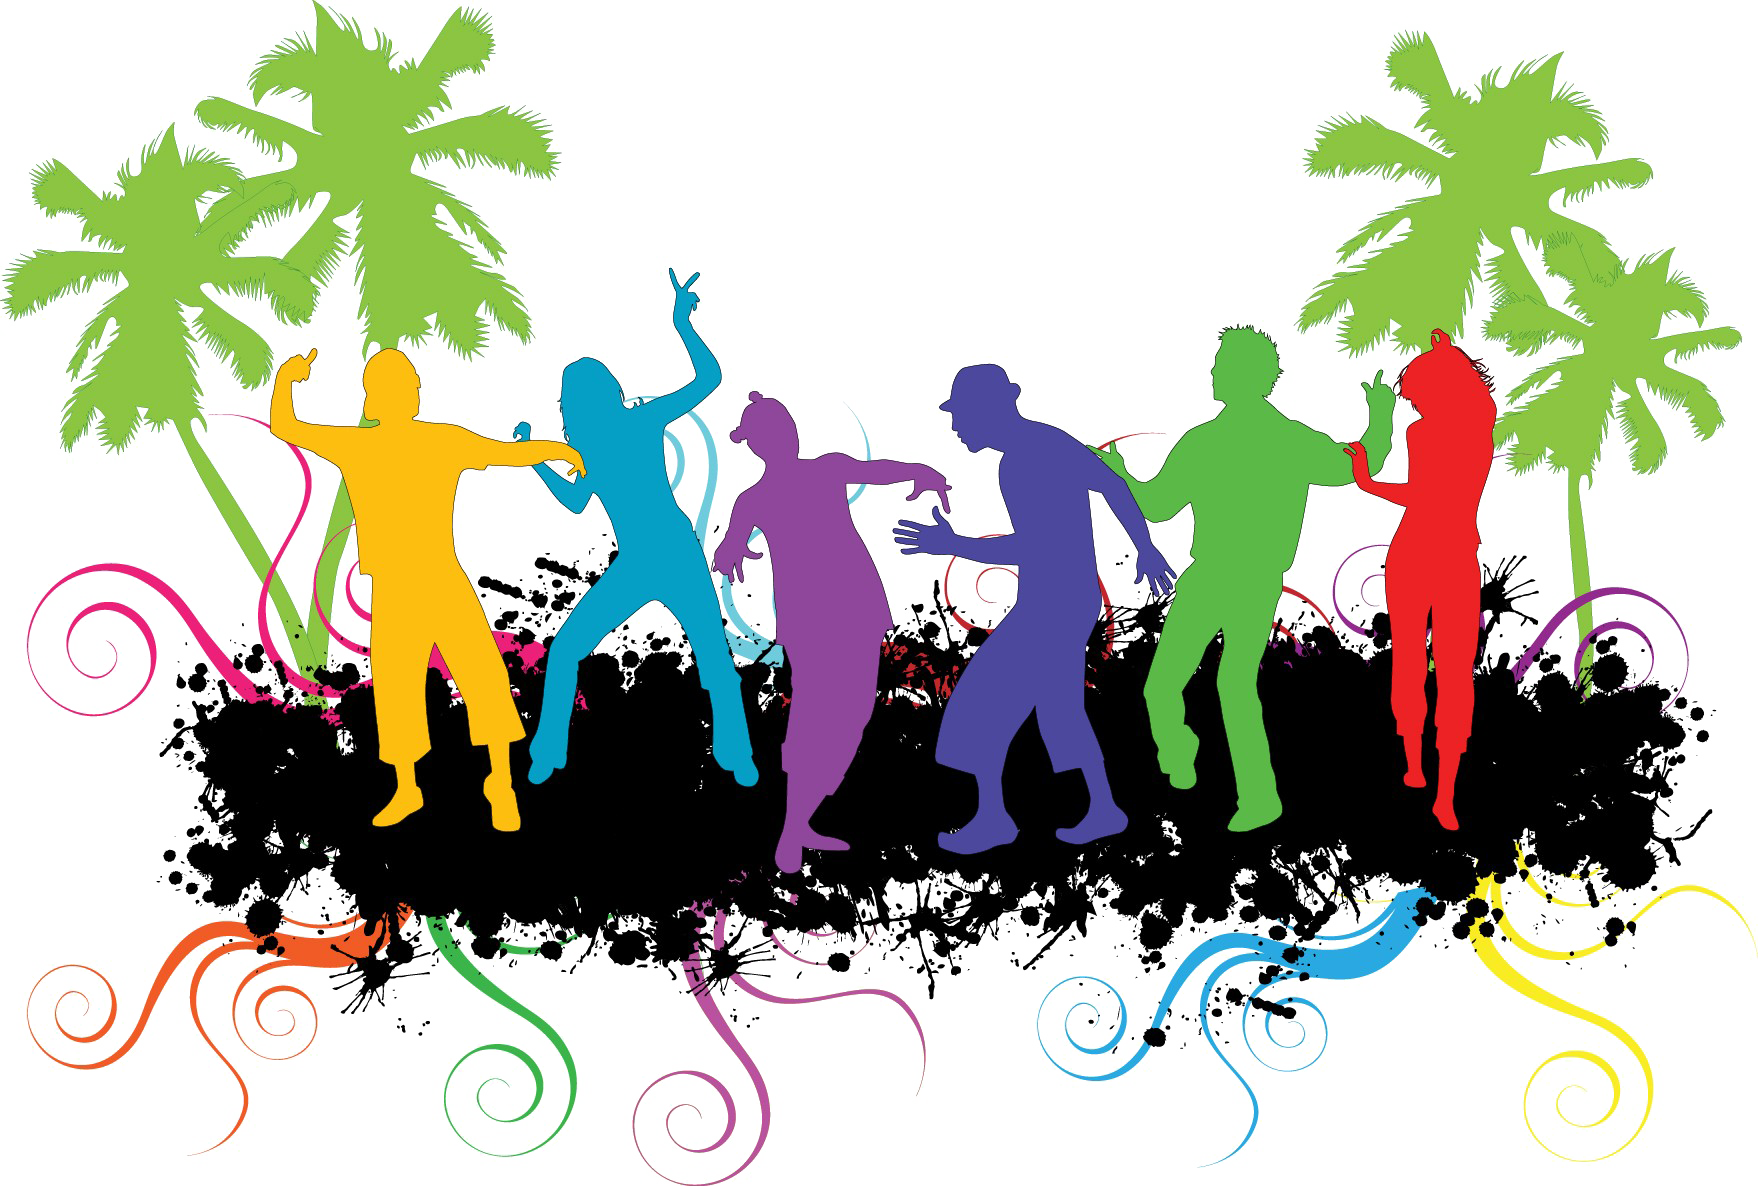 abstract people clipart silhouette